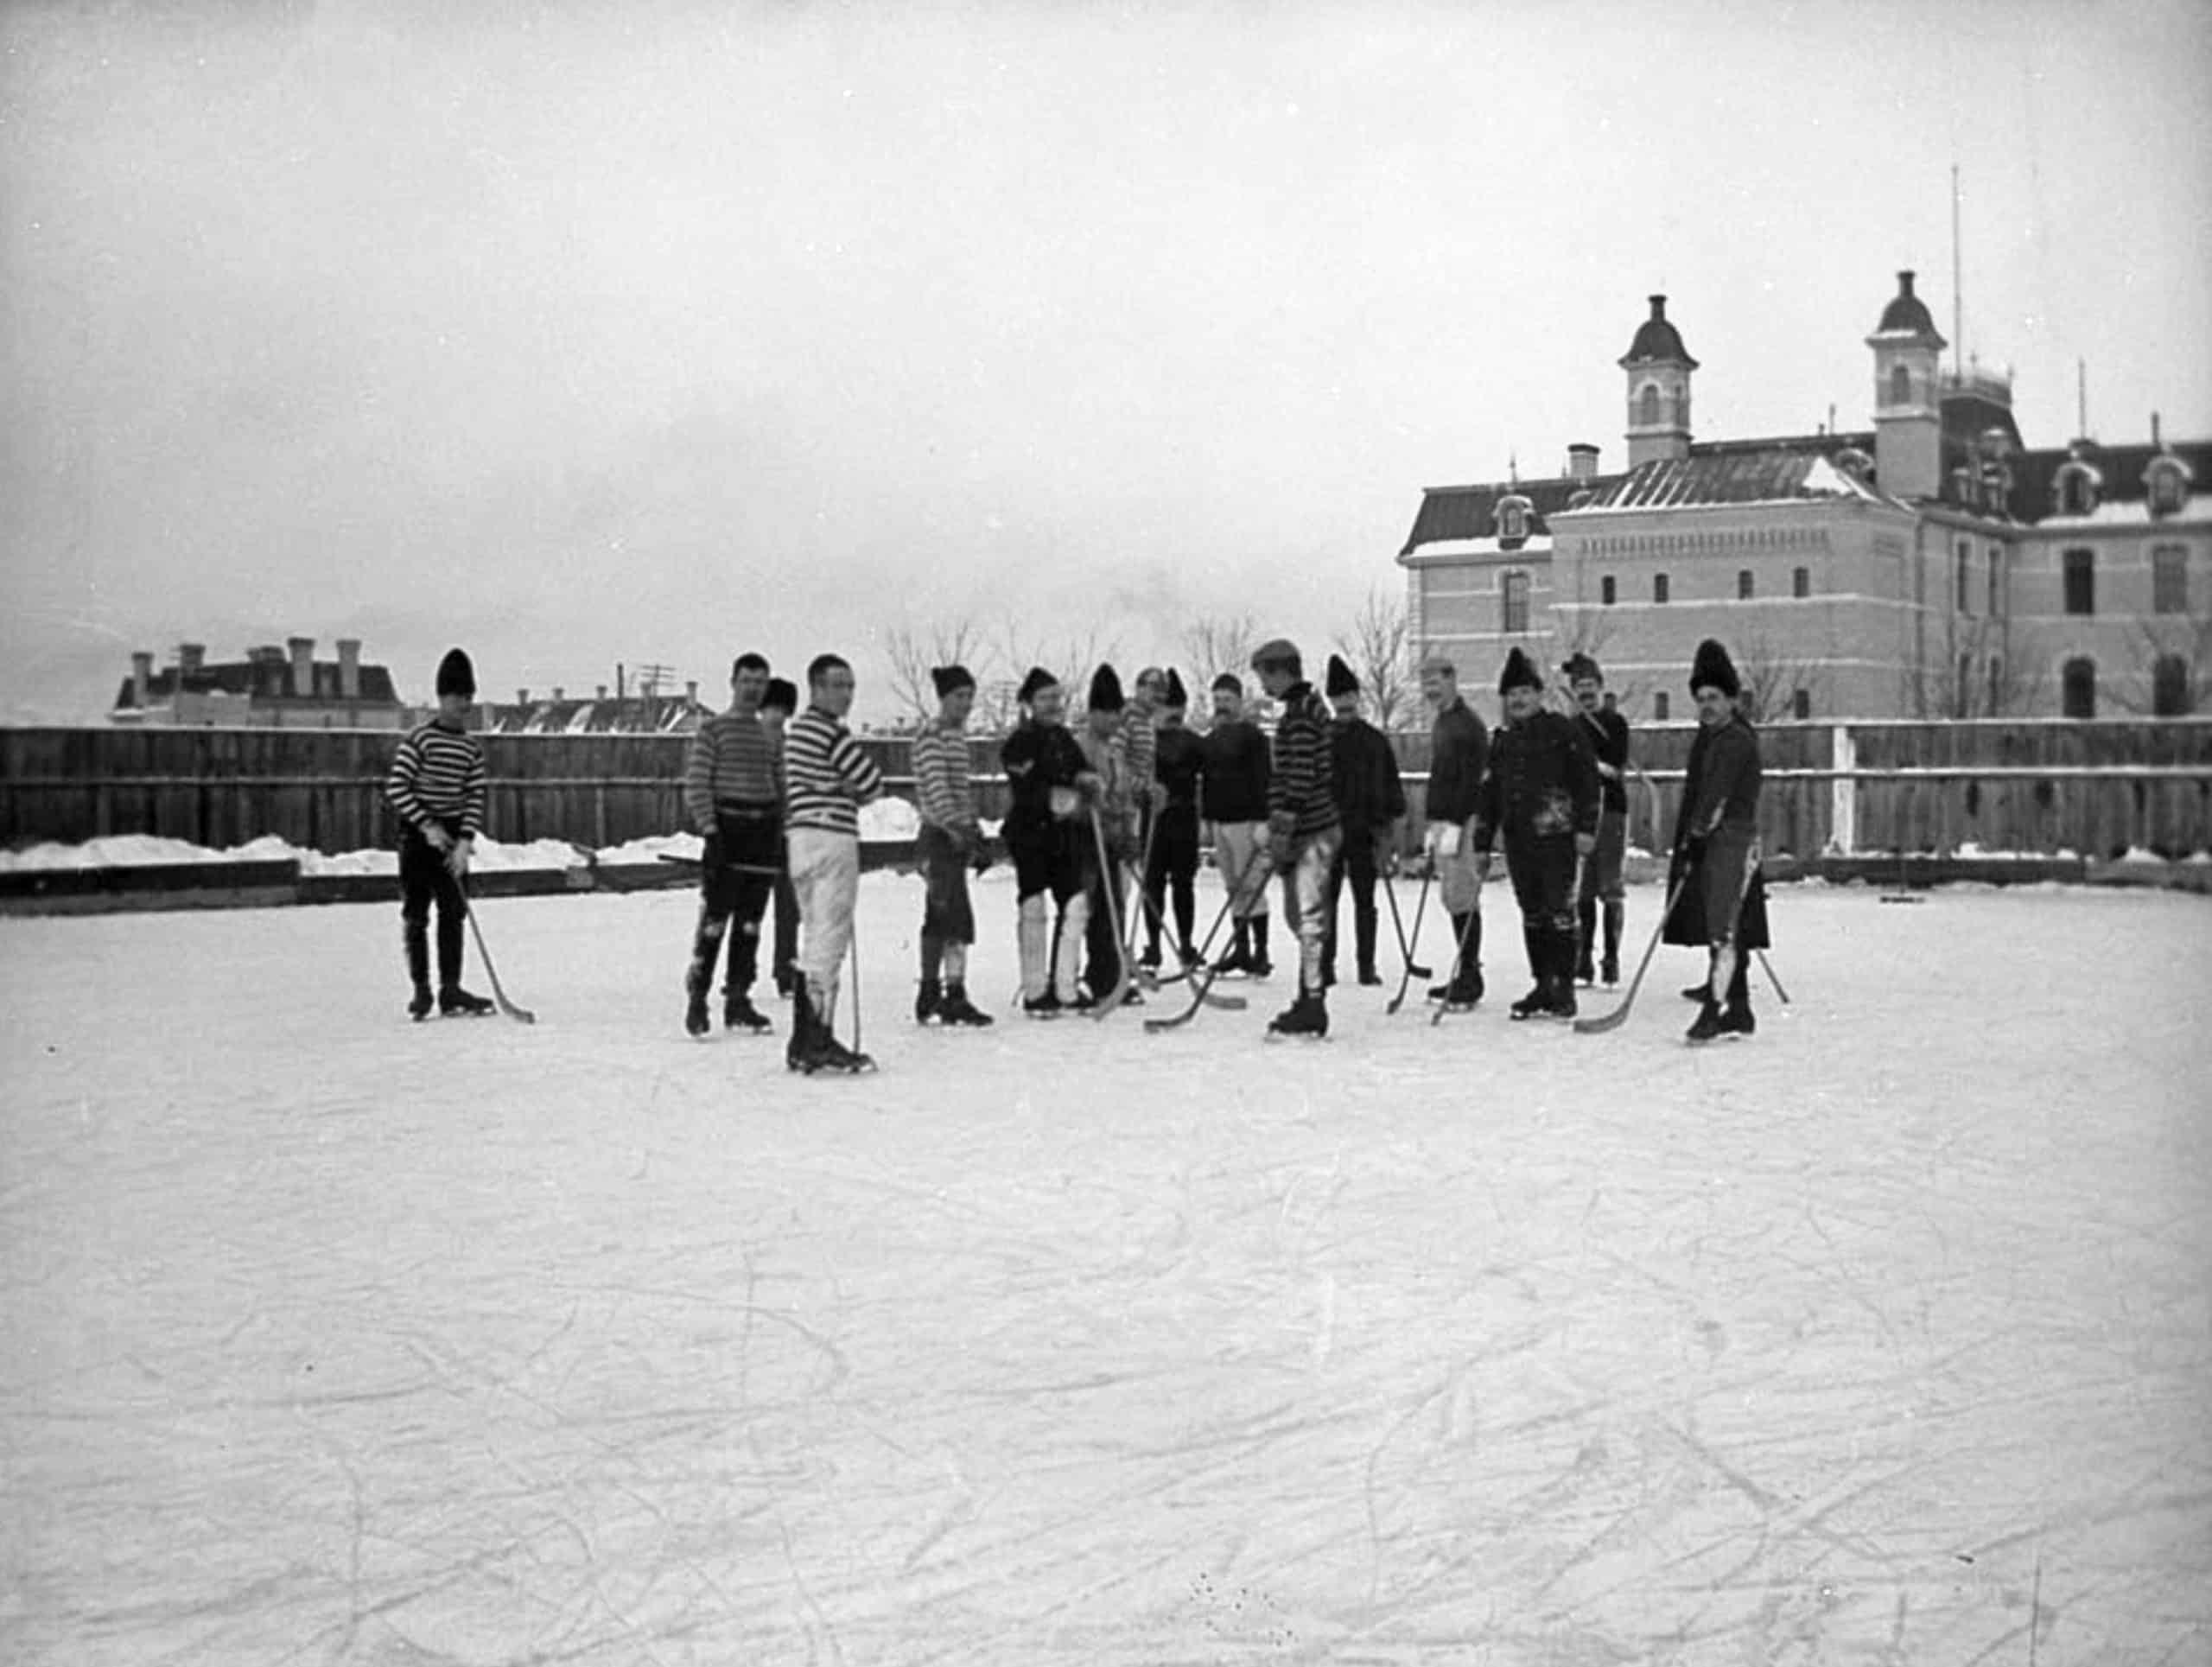 Playing-Hockey-Winnipeg-Military-School-1891-Library-and-Archives-Canada-scaled